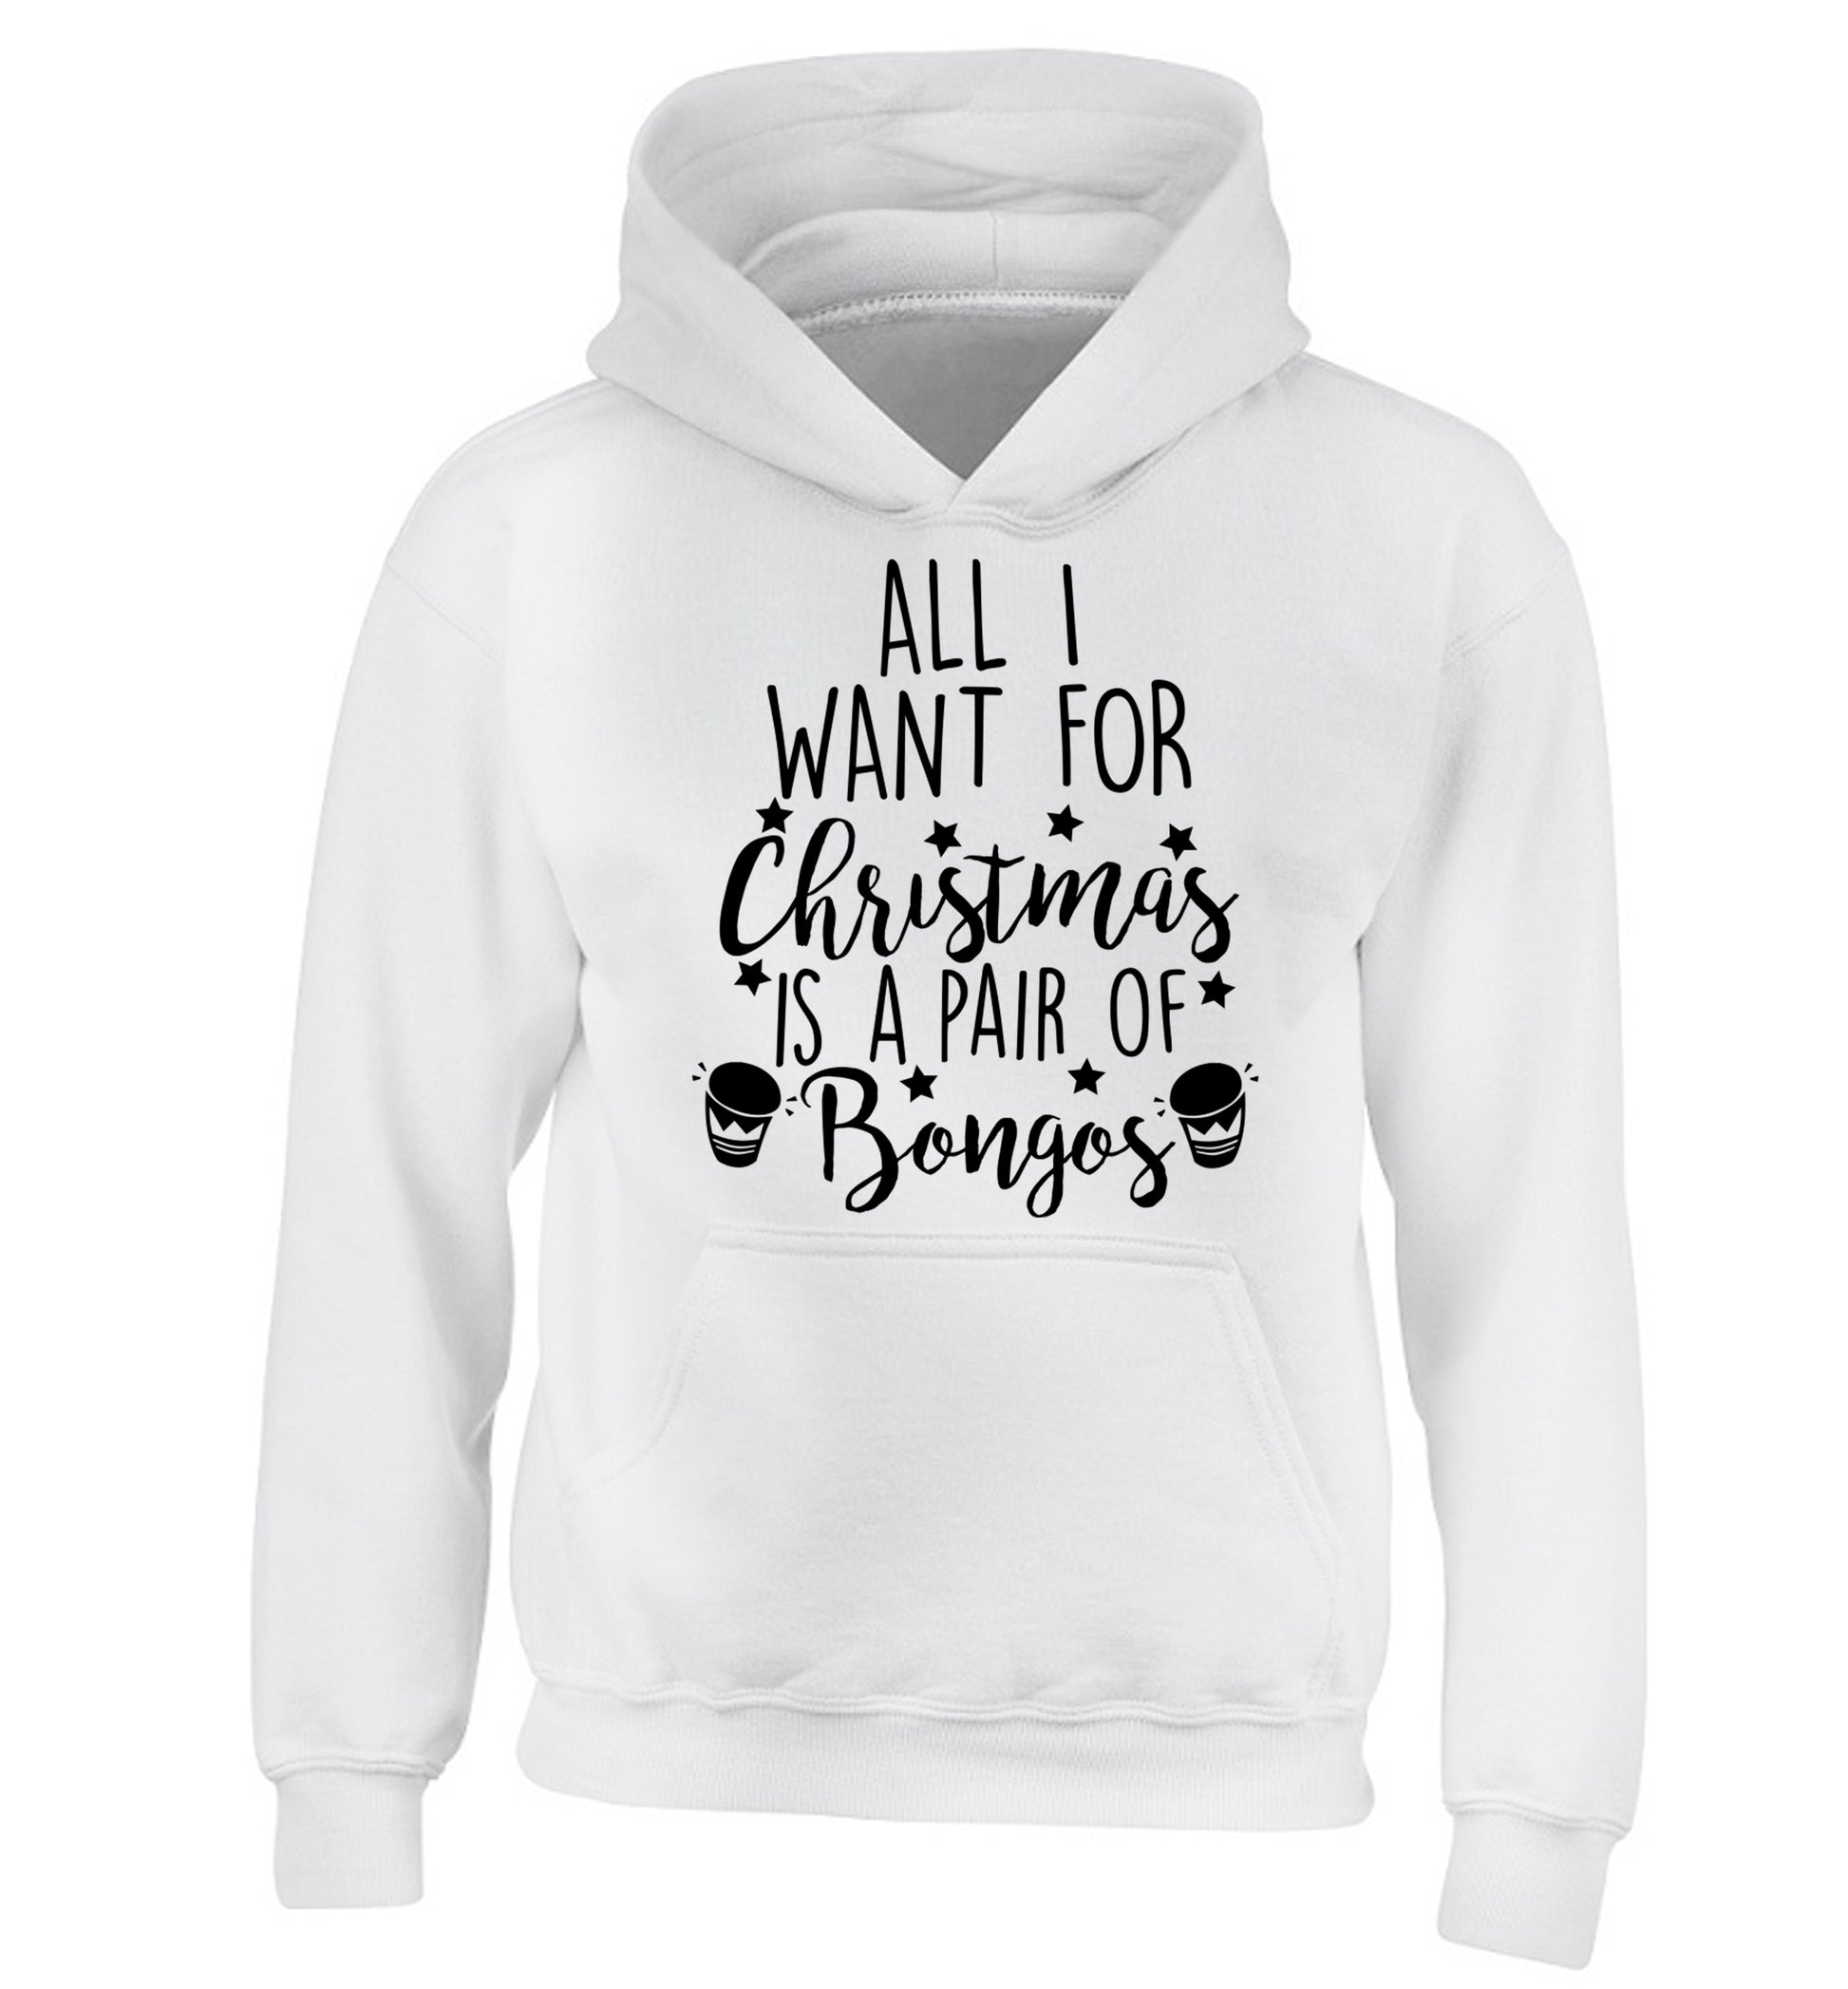 All I want for Christmas is a pair of bongos! children's white hoodie 12-14 Years